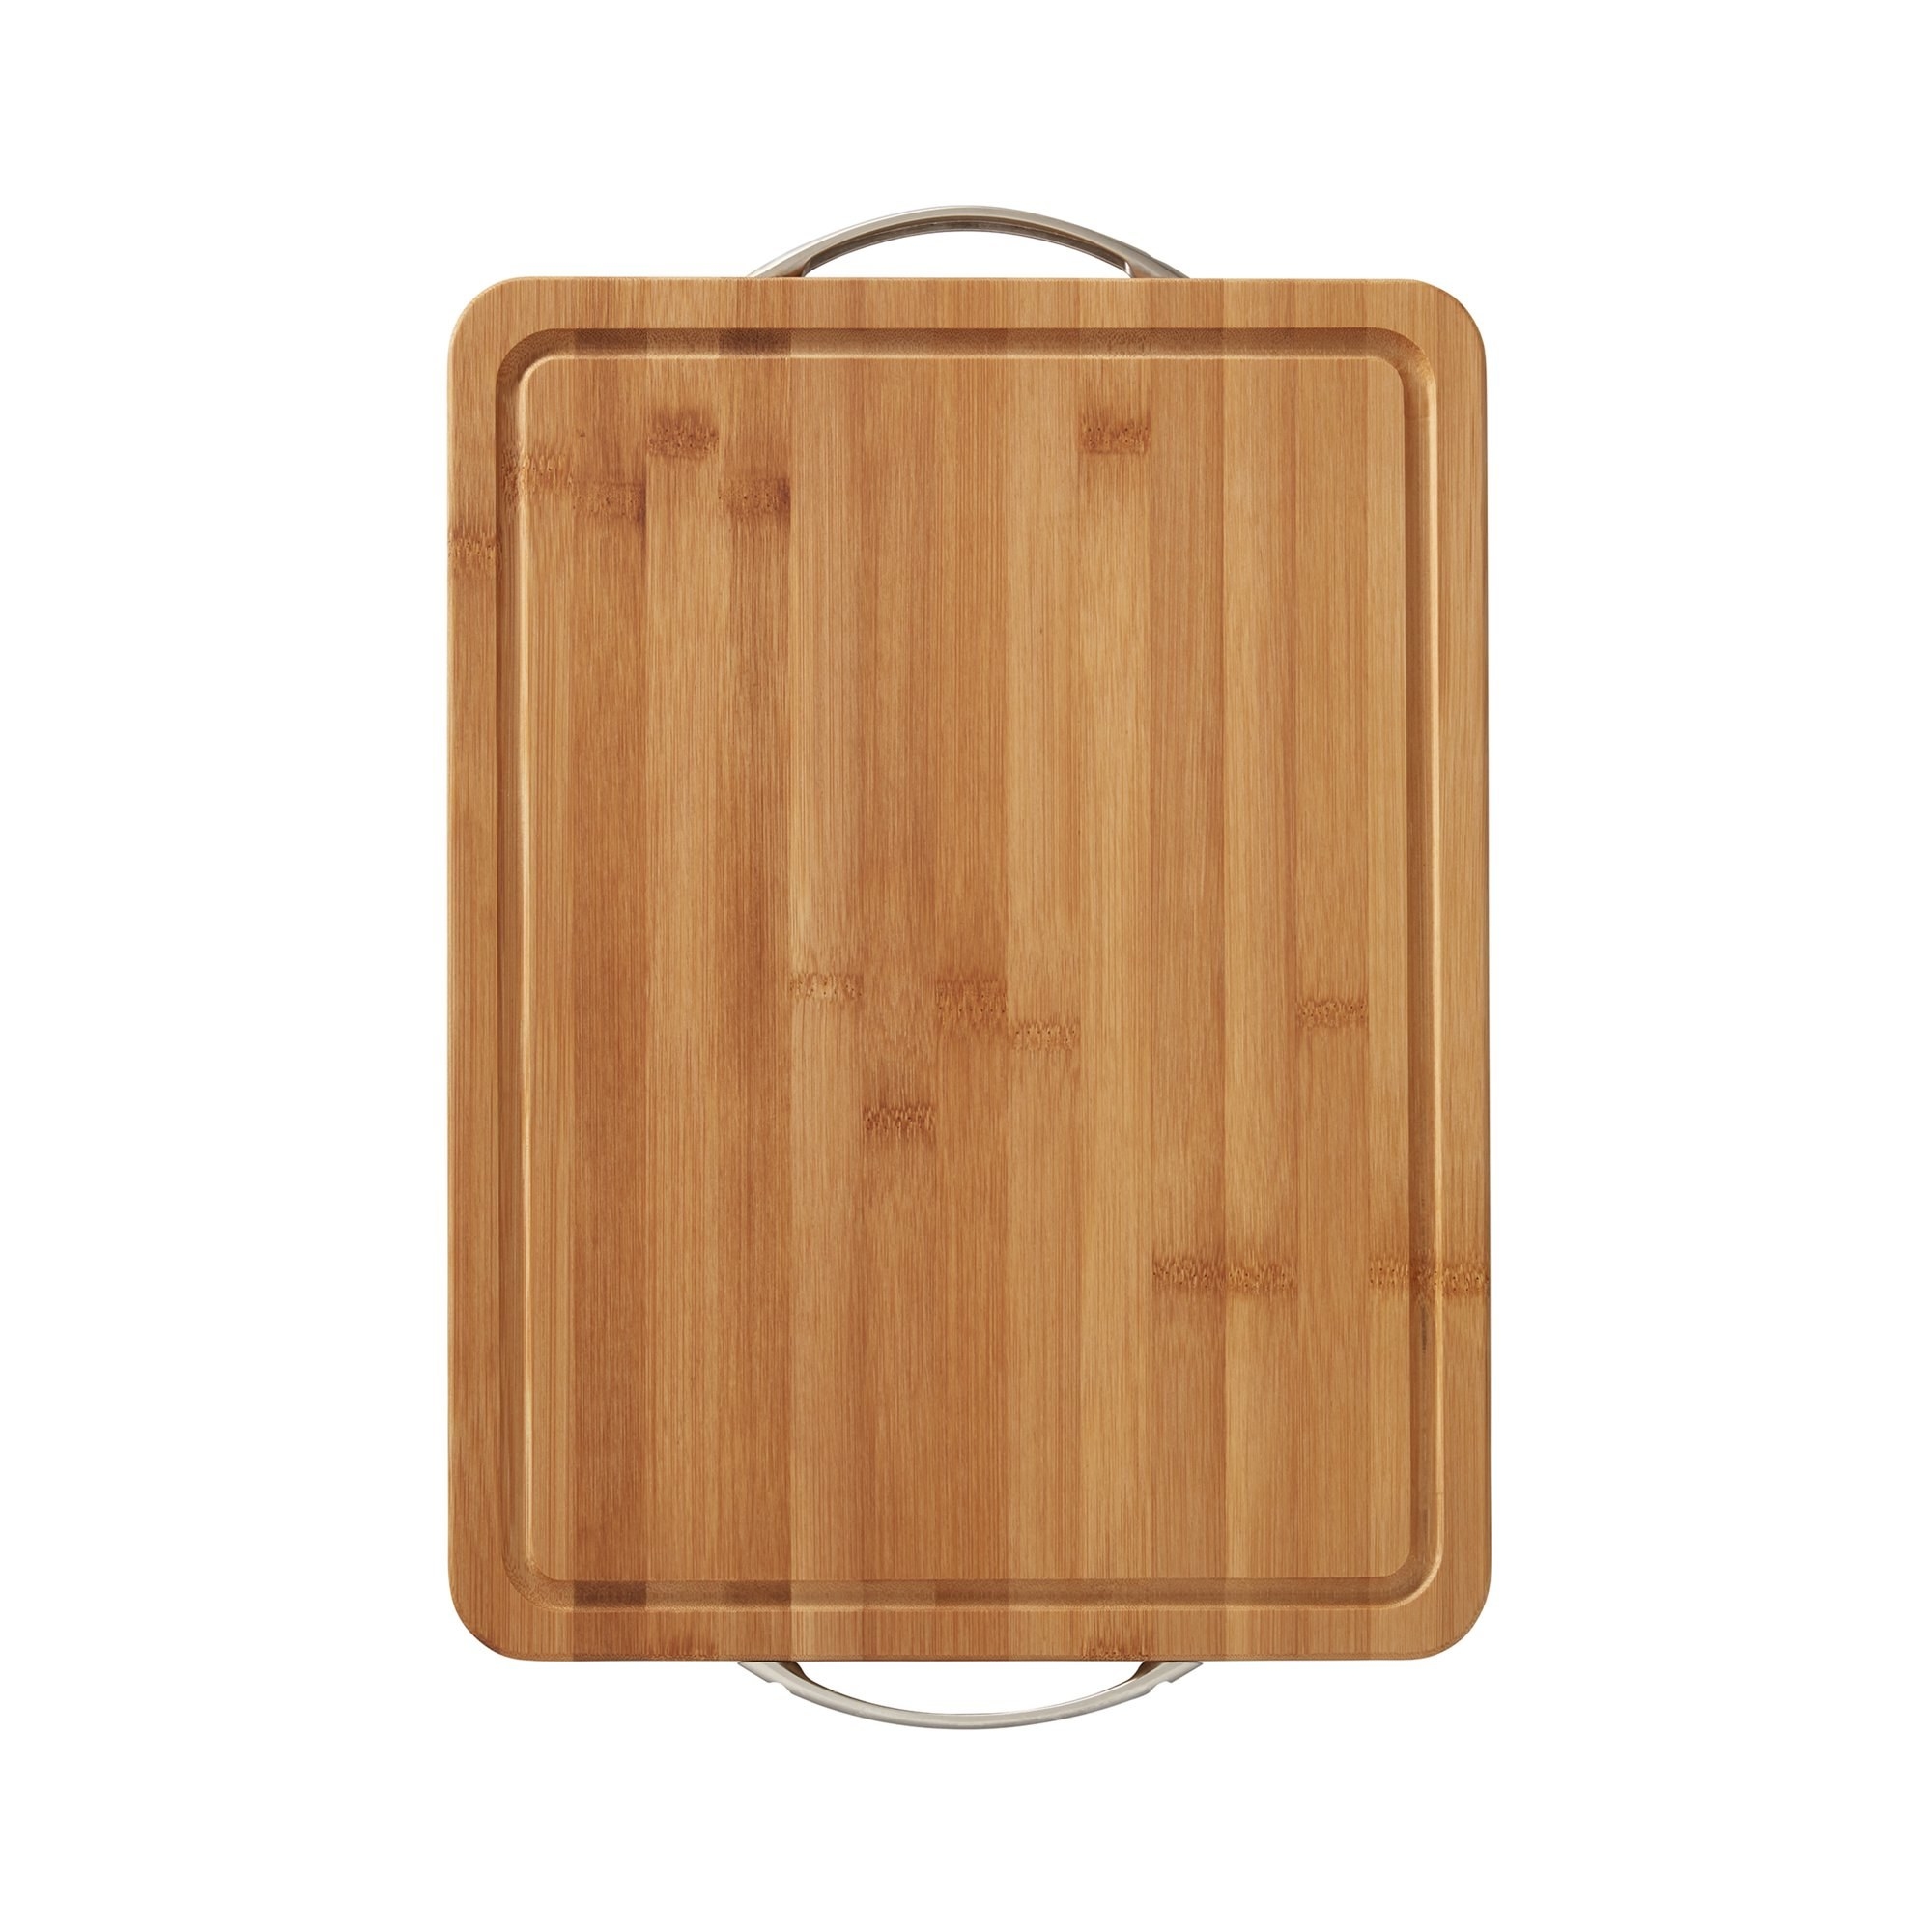 Overhead shot of a bamboo cutting board with metal handles and a grooved trench just inside its border